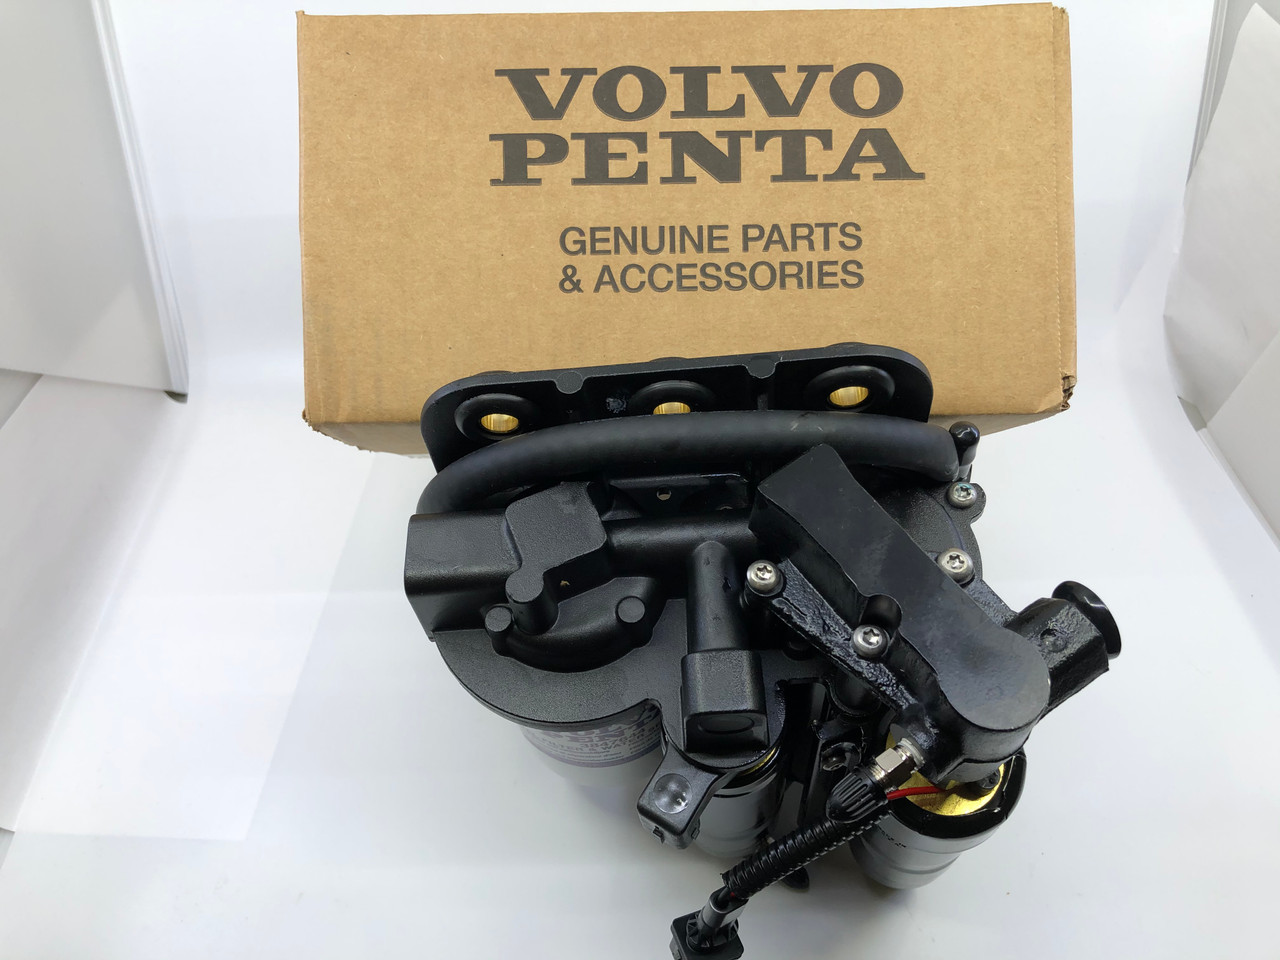 $1799.99* GENUINE VOLVO no tax* FUEL PUMP 23410900  *In Stock & Ready To Ship!